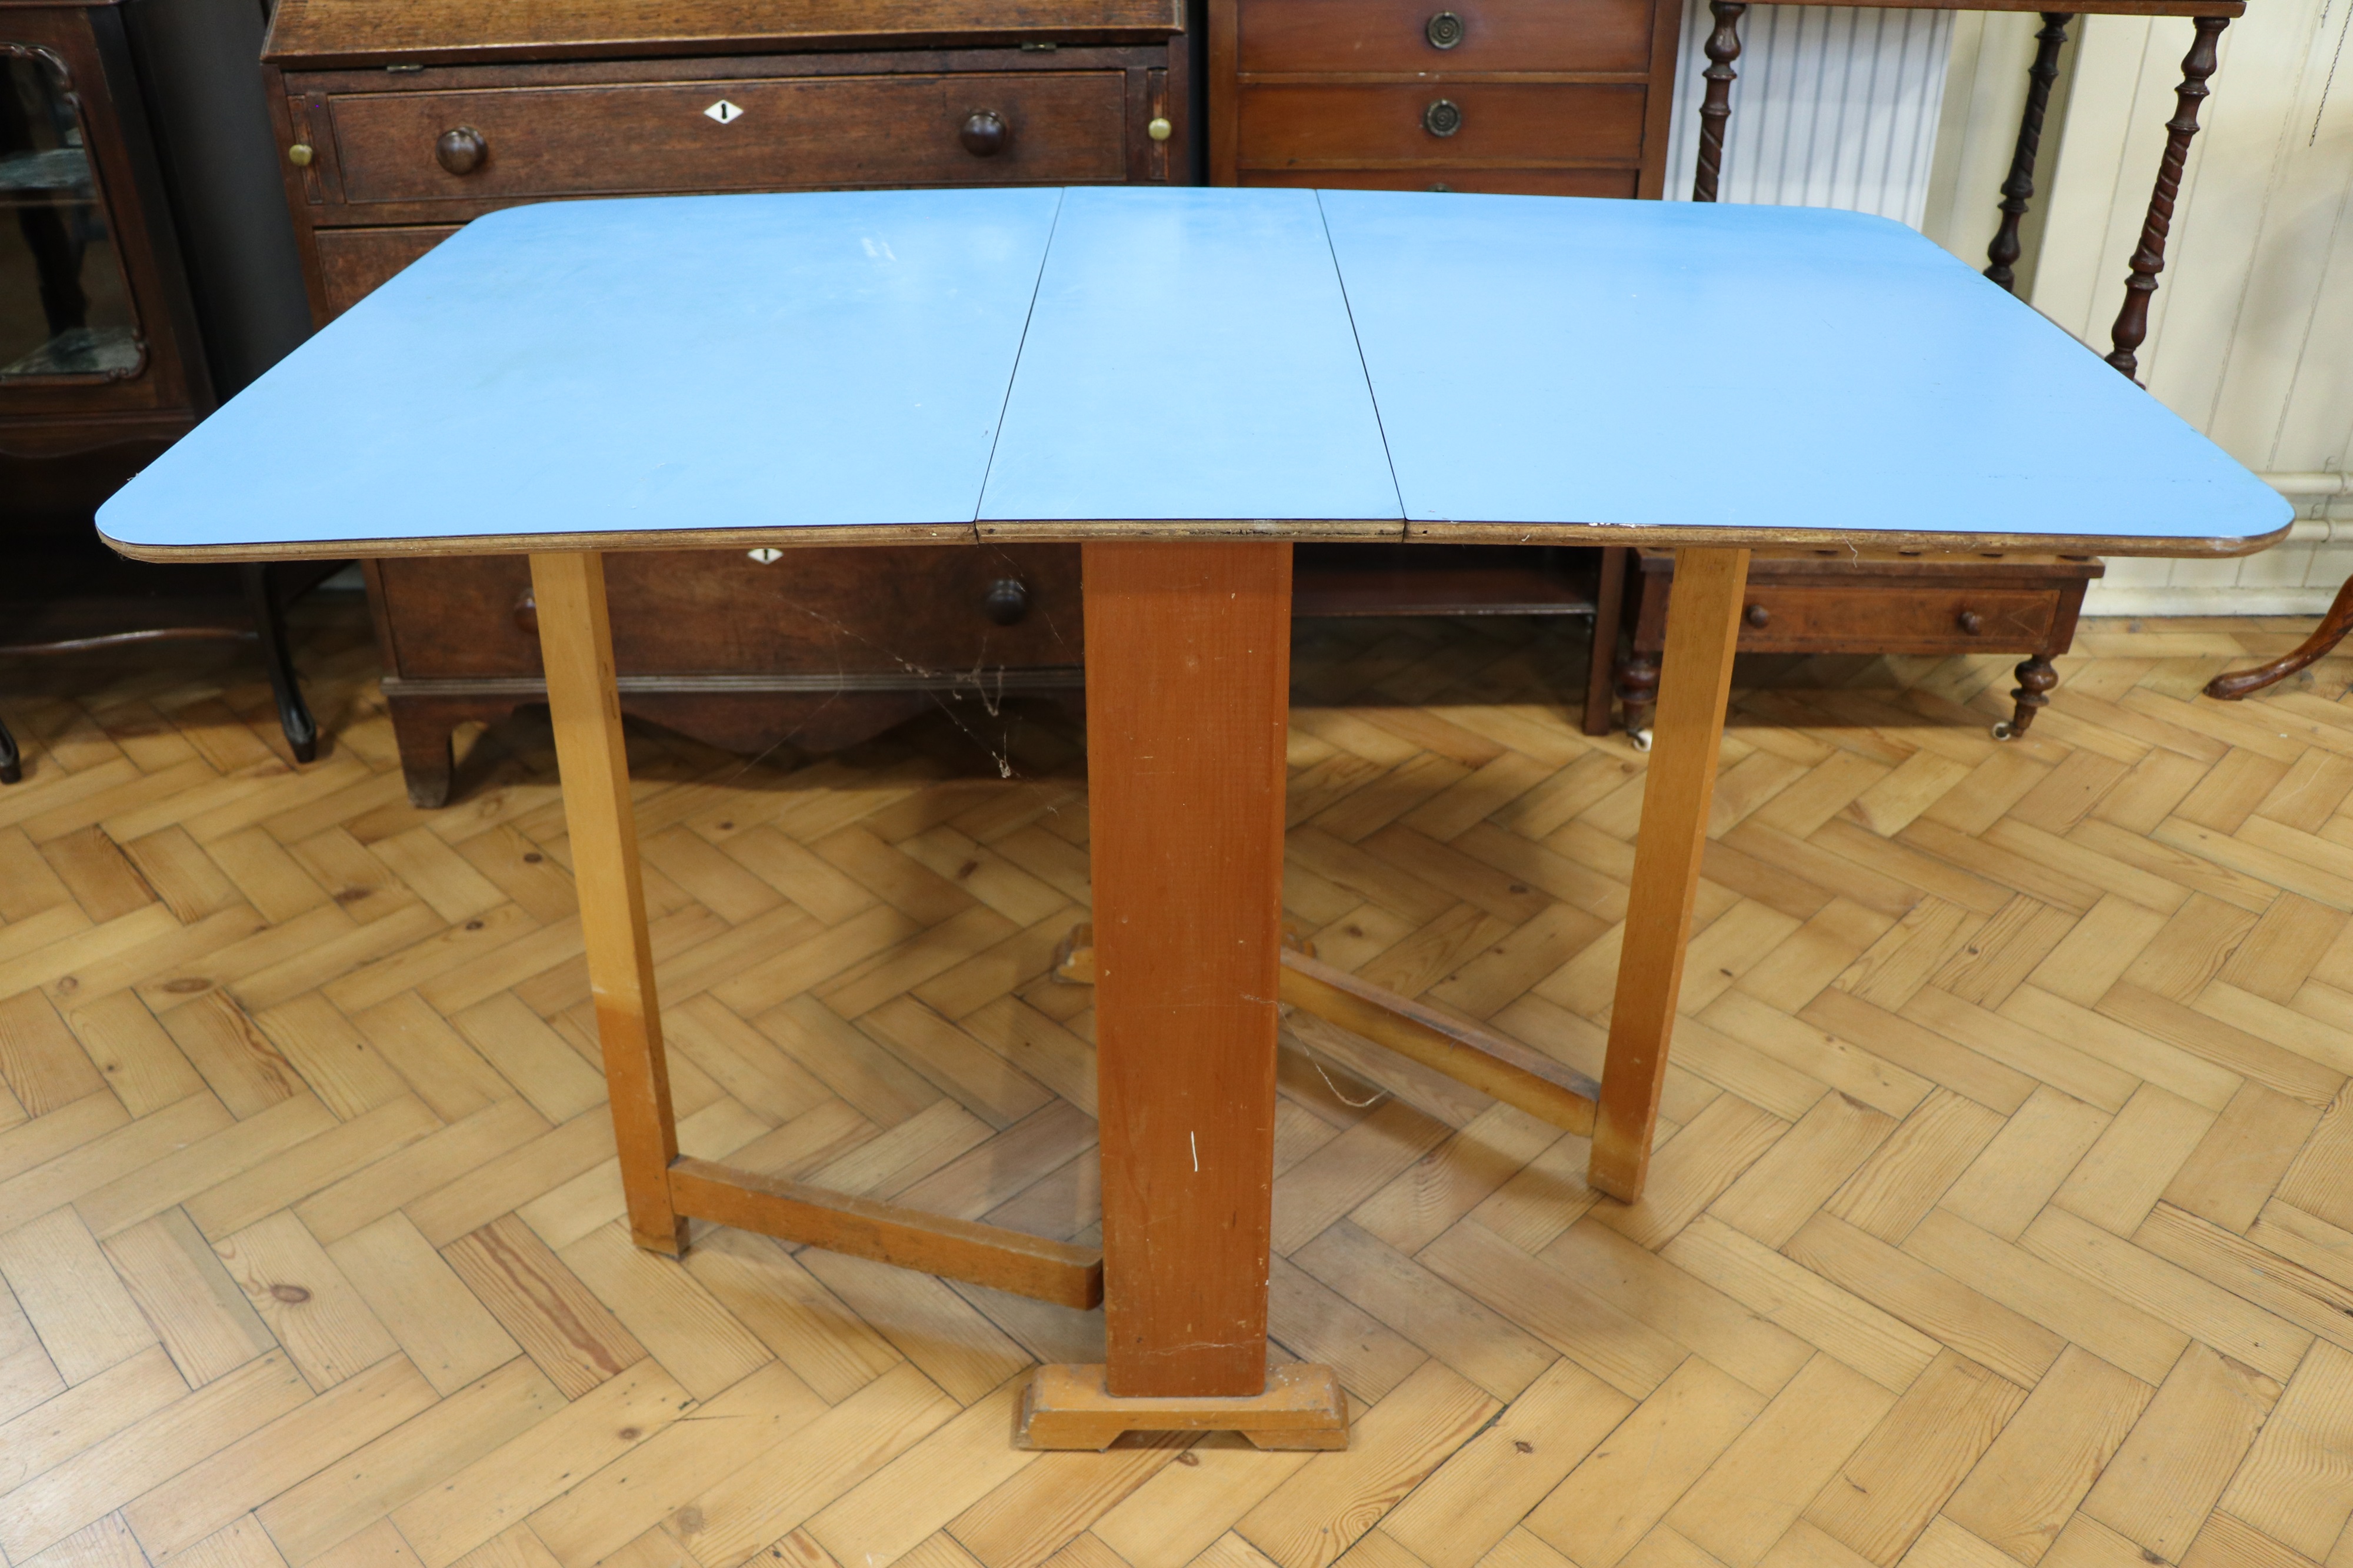 A mid-Century blue Formica topped drop-leaf kitchen table, circa 1950s - 1960s, 75 cm x 119 cm x - Image 3 of 3